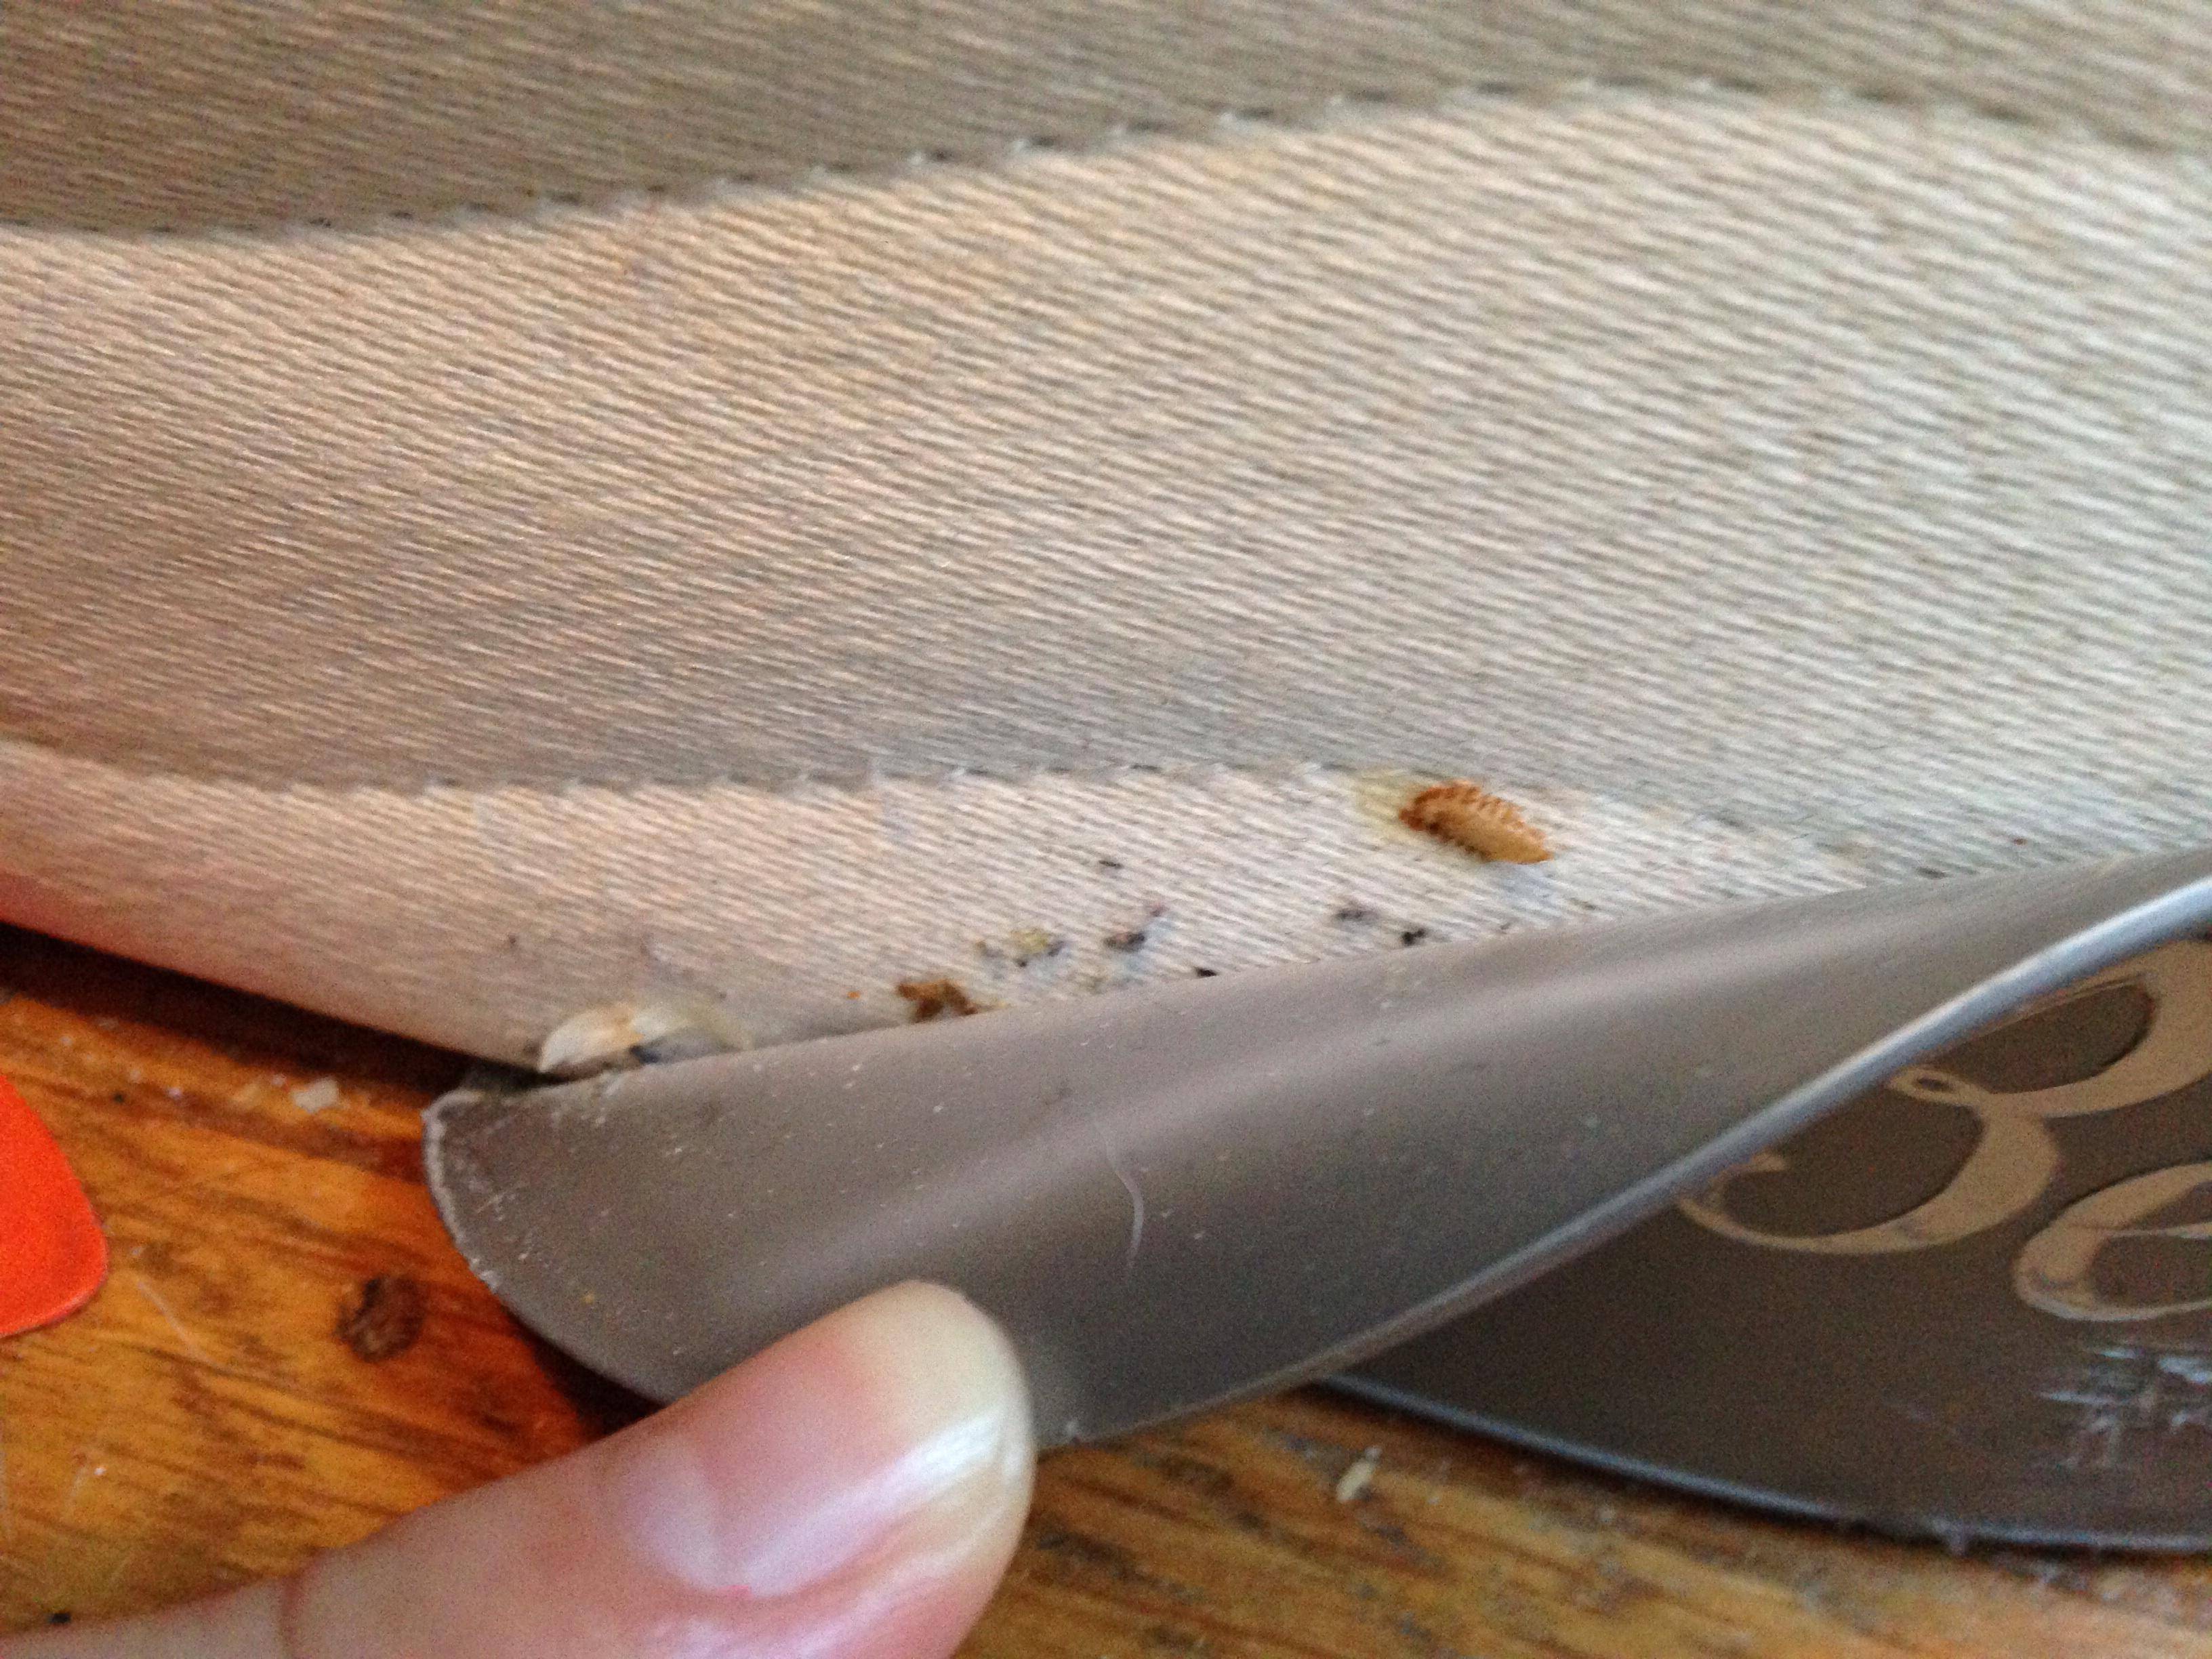 Causes and How to get rid of Carpet Beetles - Pittsburgh ...